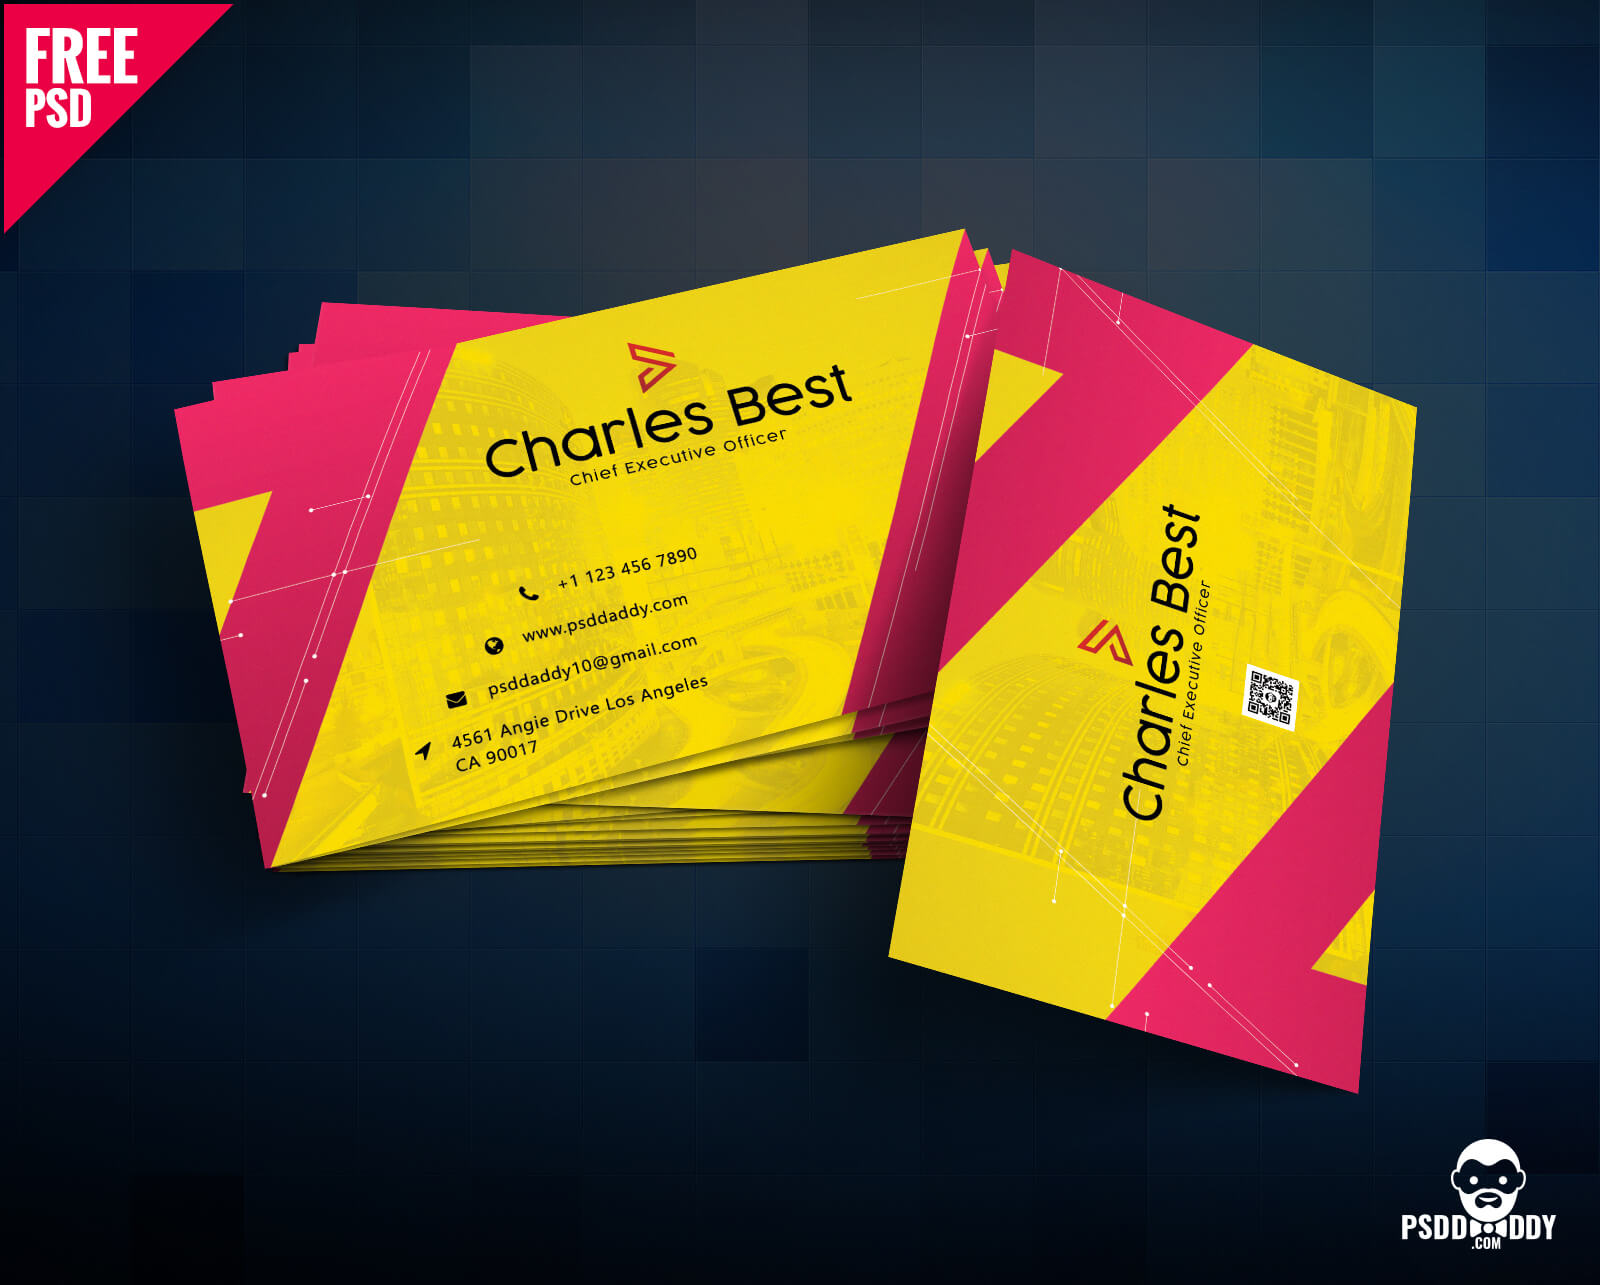 Download] Creative Business Card Free Psd | Psddaddy For Photoshop Cs6 Business Card Template